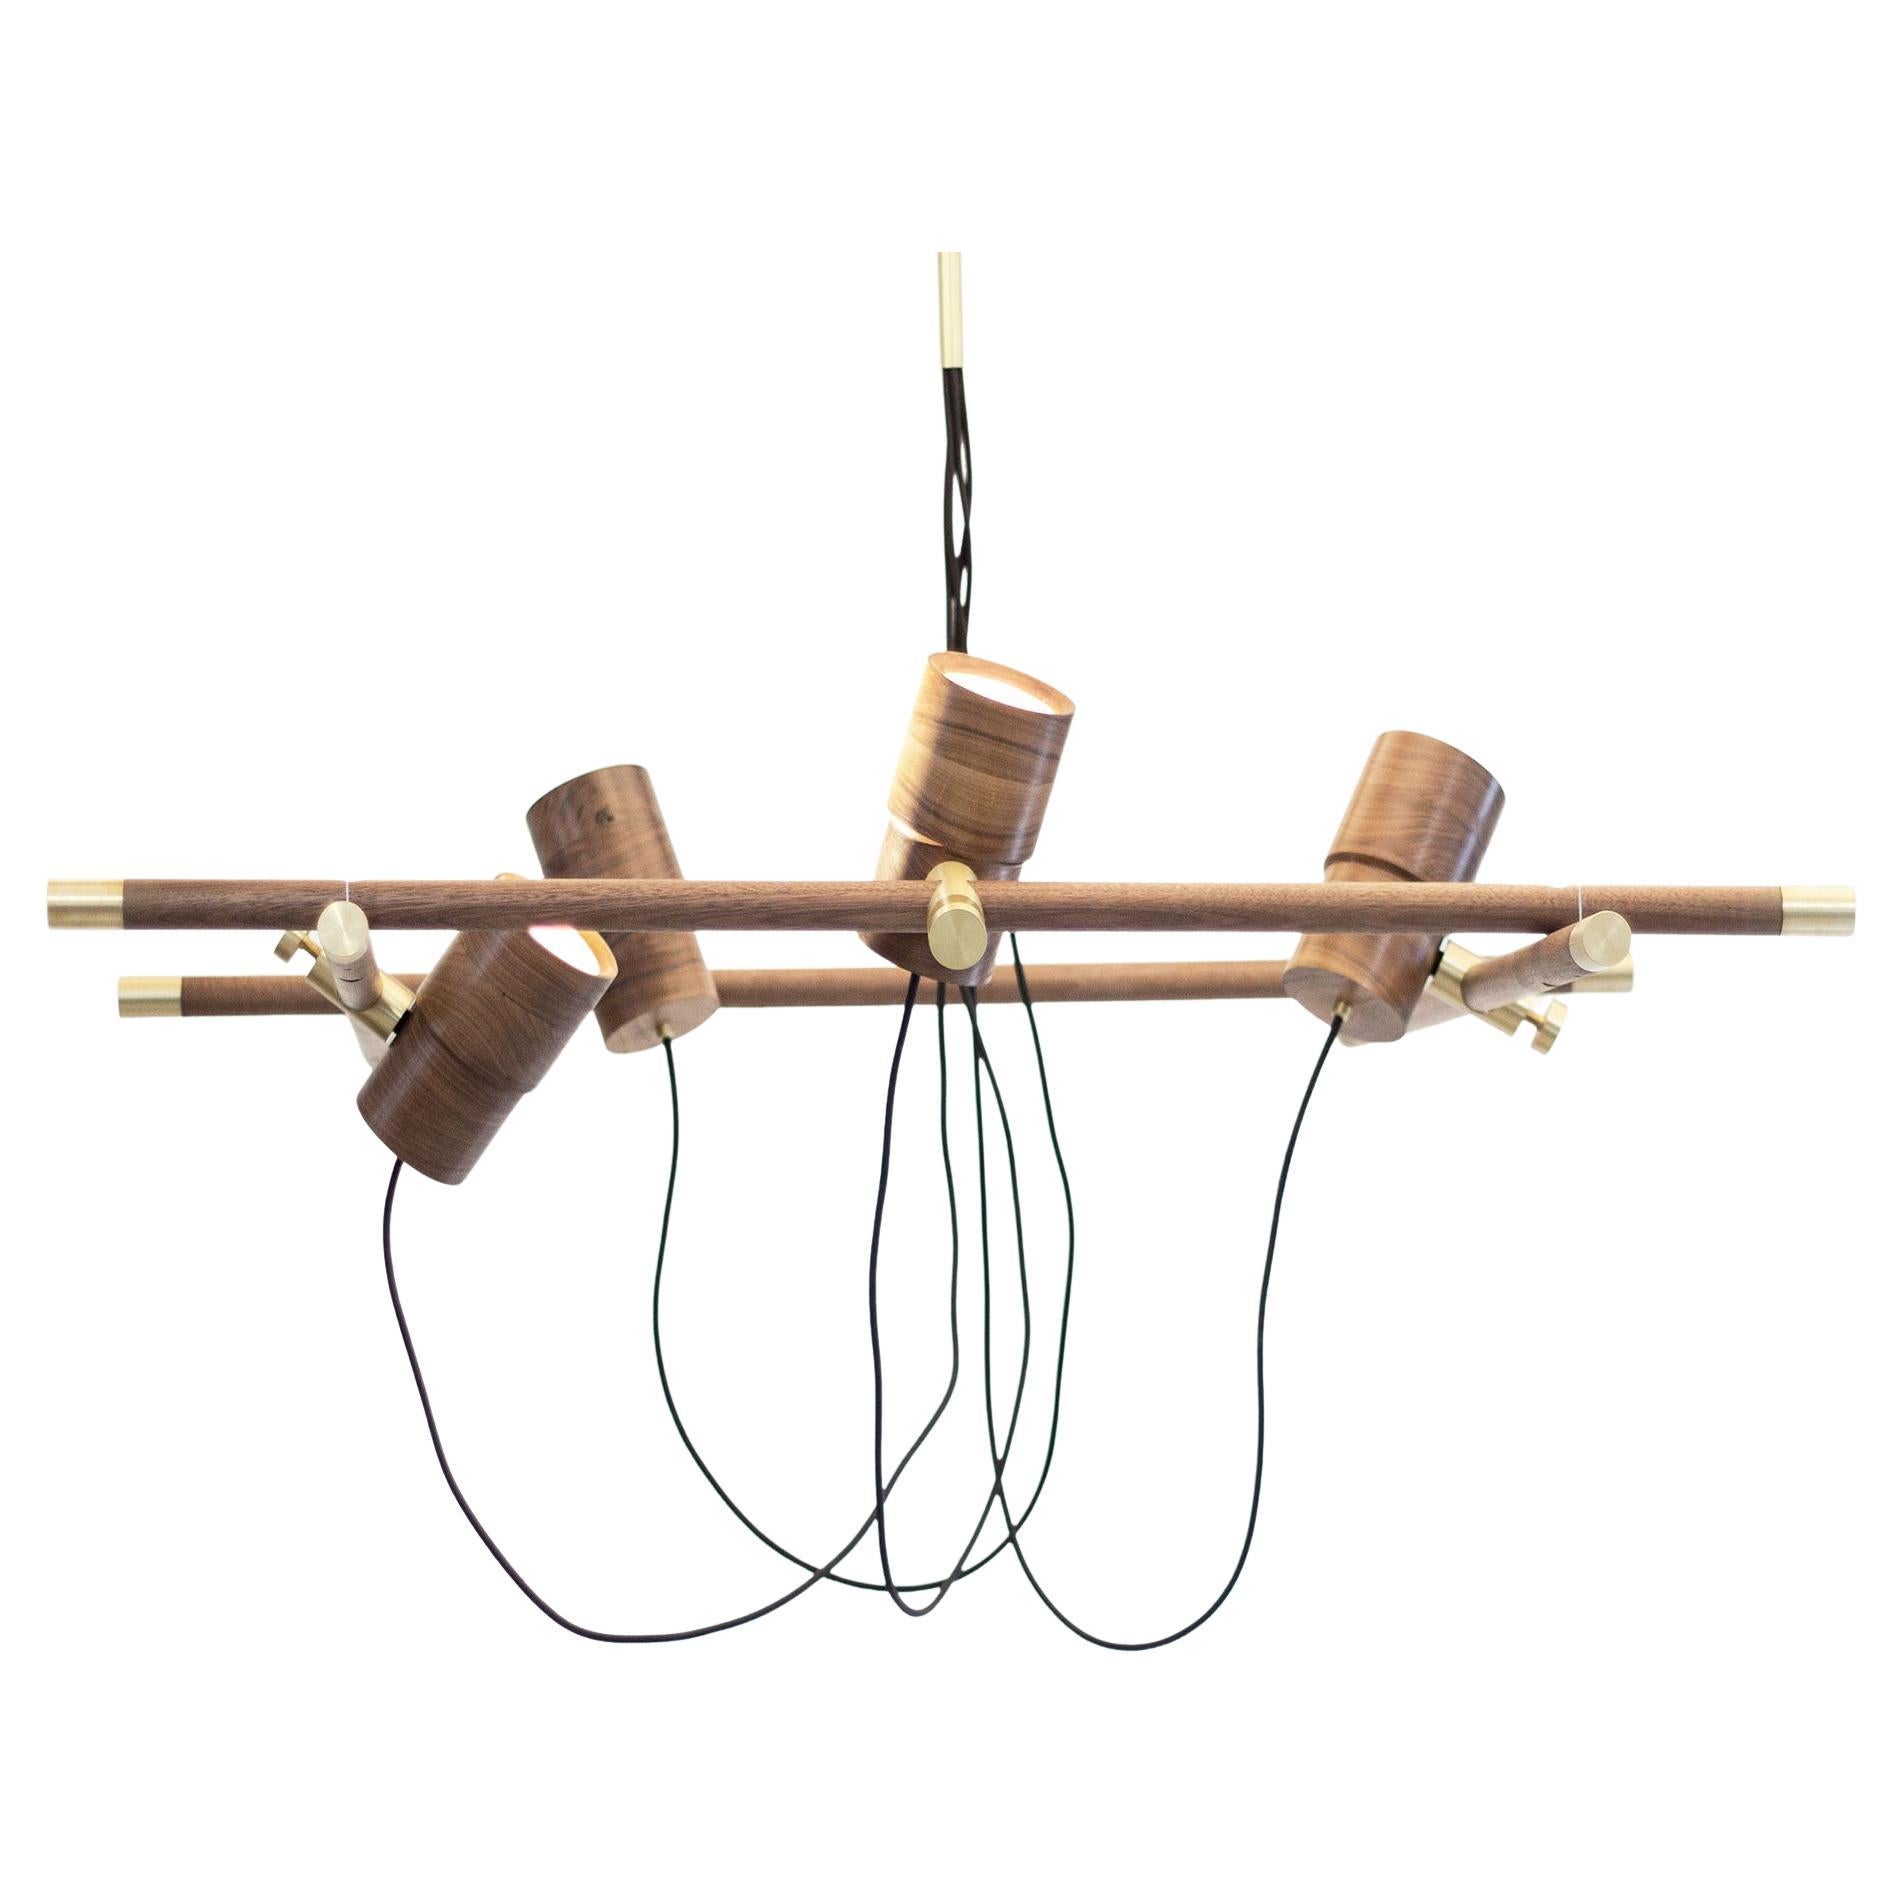 Guvukai, Light Fixture Made of Solid Wood and Brass by CMX